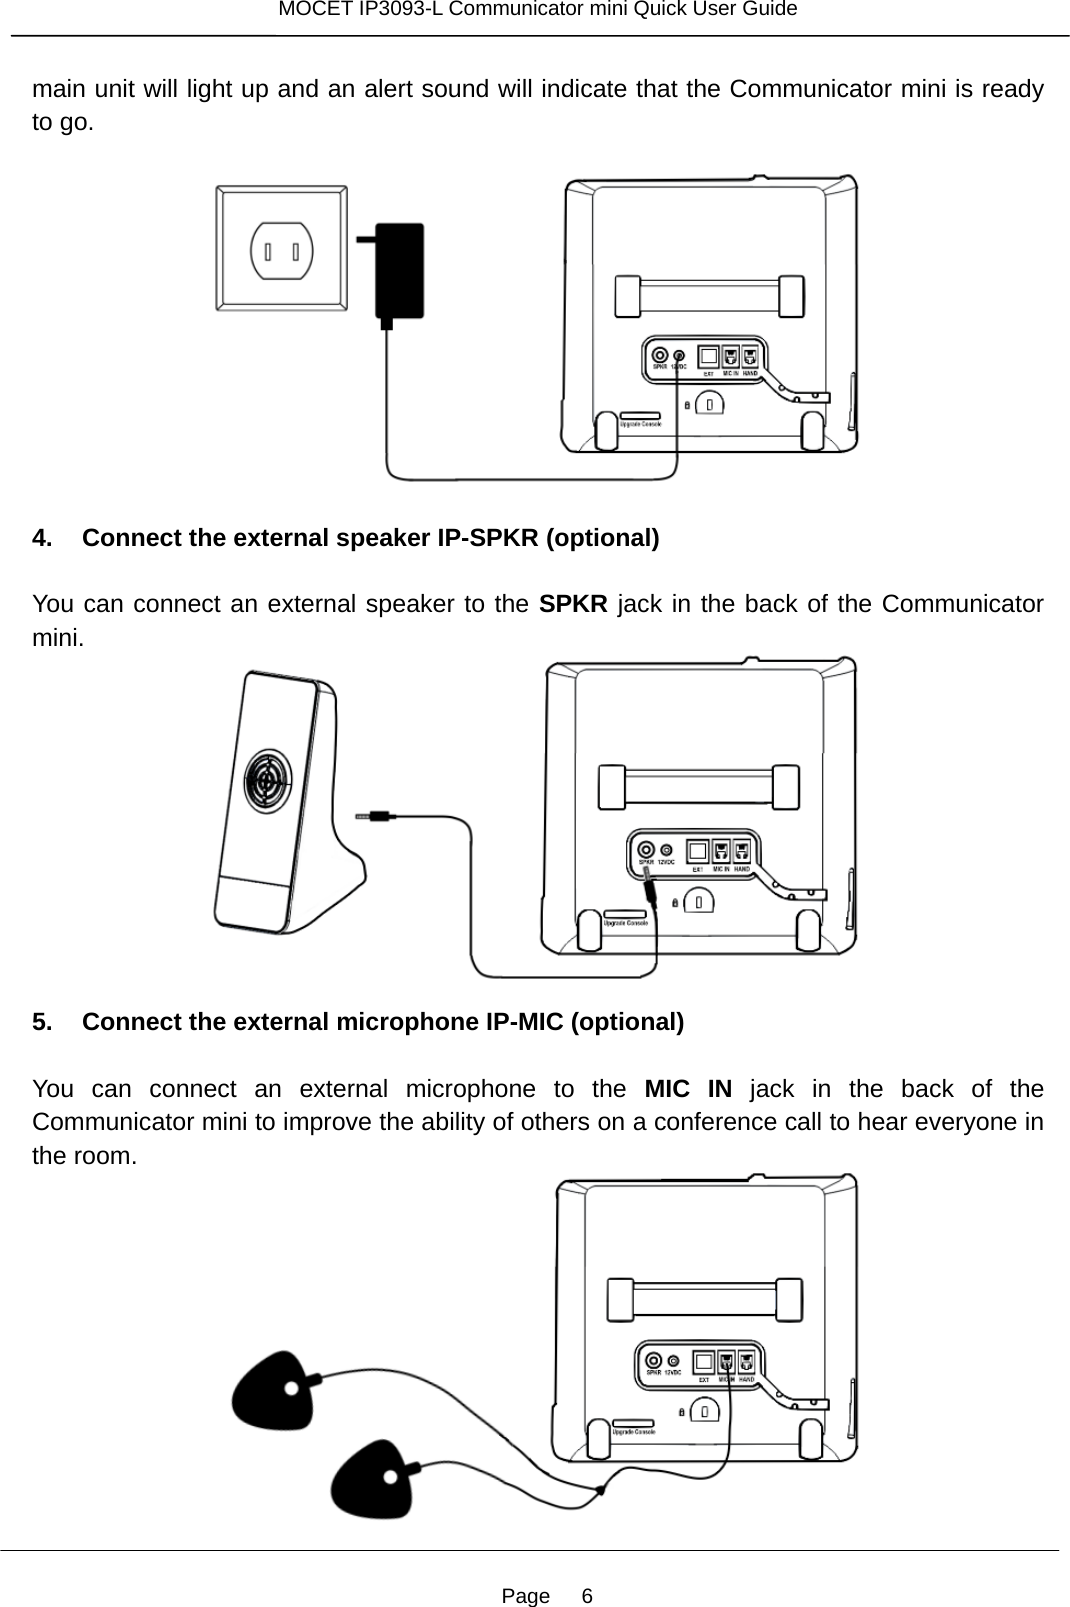 Page   6 MOCET IP3093-L Communicator mini Quick User Guide  main unit will light up and an alert sound will indicate that the Communicator mini is ready to go.     4. Connect the external speaker IP-SPKR (optional)  You can connect an external speaker to the SPKR jack in the back of the Communicator mini.  5. Connect the external microphone IP-MIC (optional)  You can connect an external microphone to the MIC IN jack in the back of the Communicator mini to improve the ability of others on a conference call to hear everyone in the room.    